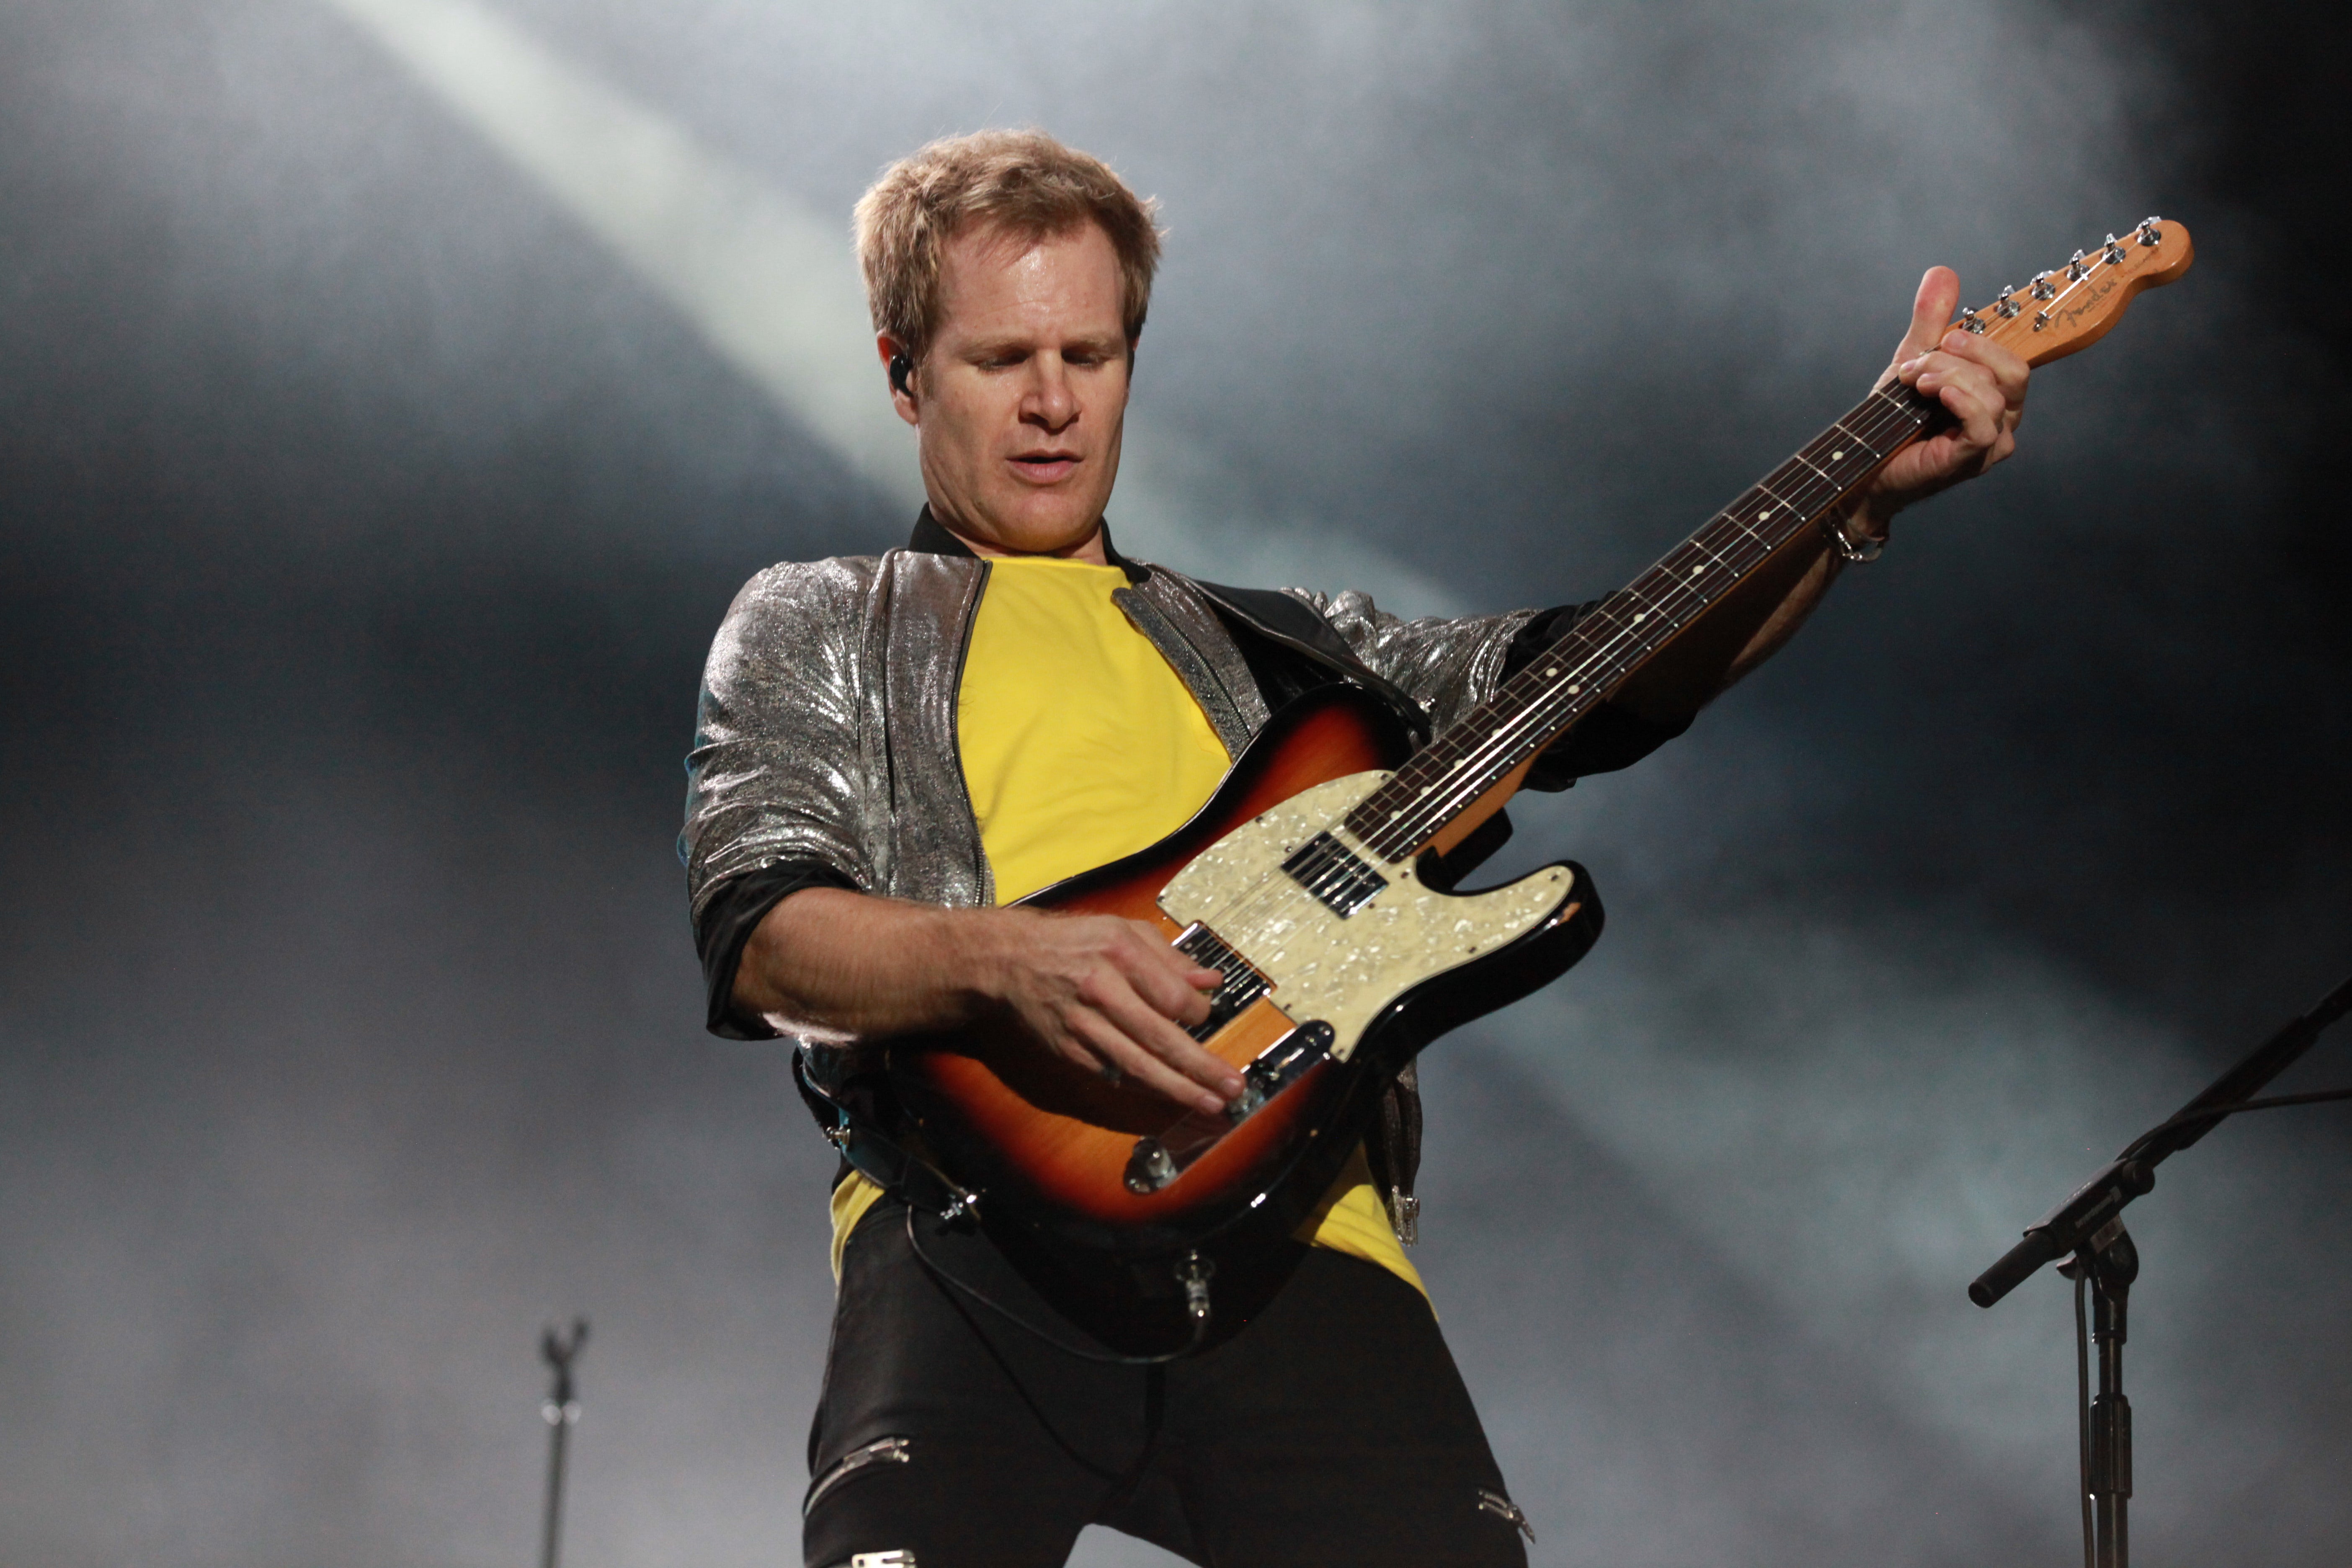 Duran Duran guitarist Andy Taylor gives cancer update: 'I'm trying to stay alive'